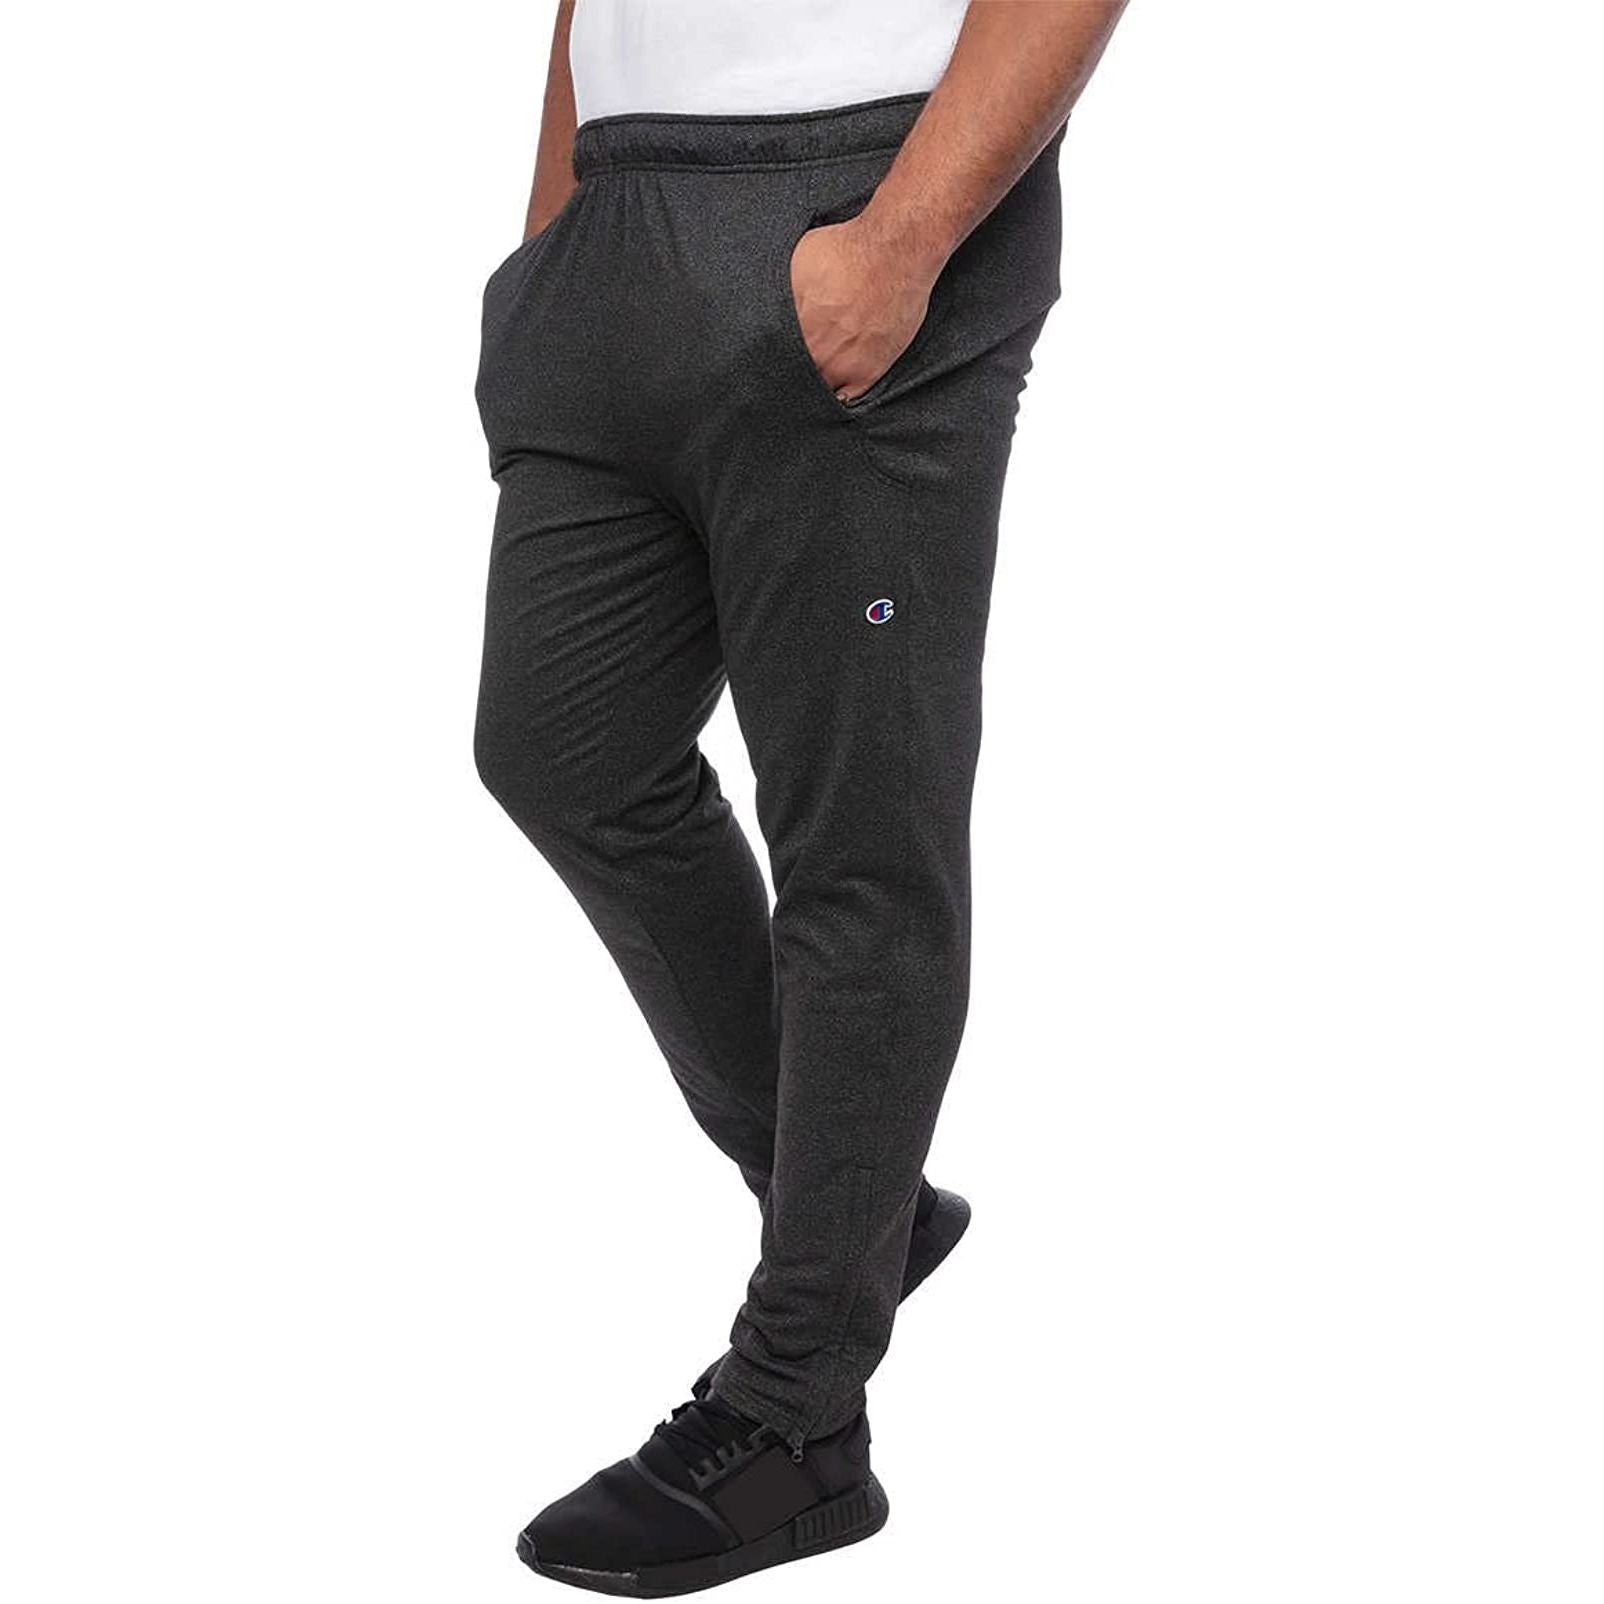 Champion Men's Cross Training Pant - High-performance athletic fit workout pant for ultimate comfort and durability.